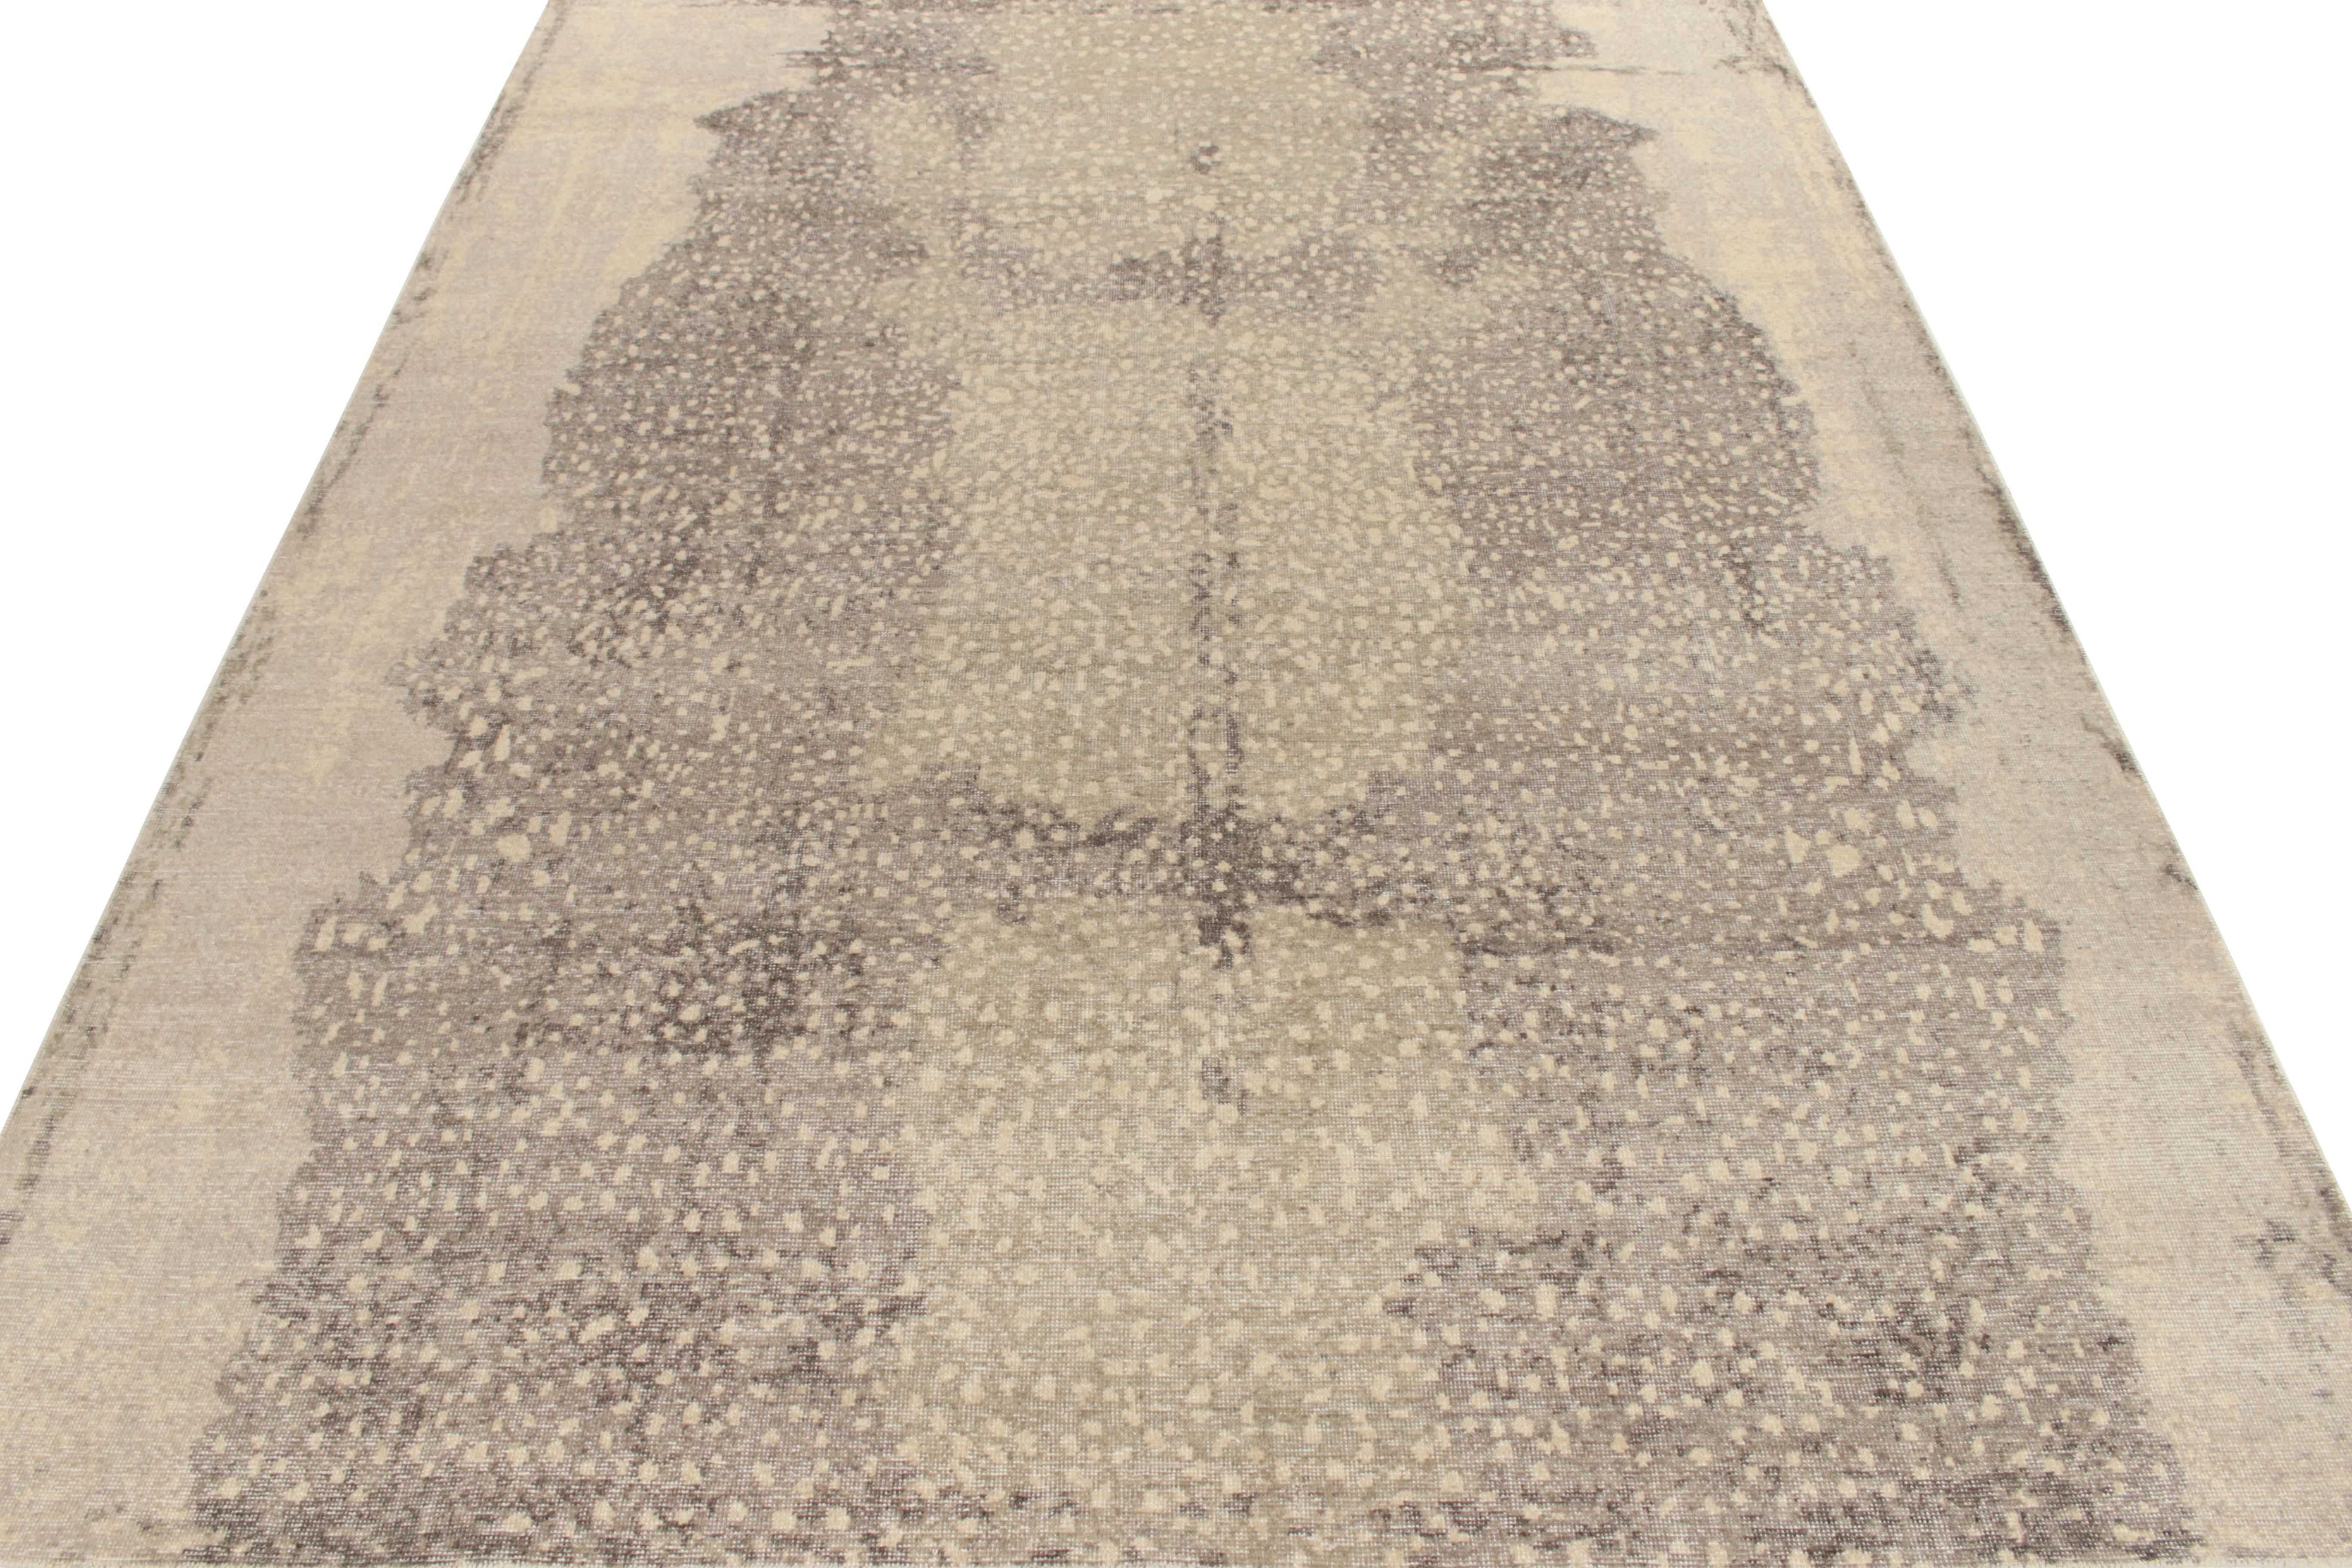 Hand-knotted in wool, a 9x12 contemporary rug from our Homage collection featuring a thought provoking abstract pattern in beige-grey tones playing positive negative for a refined take in distressed style further carrying a shabby chic appeal in